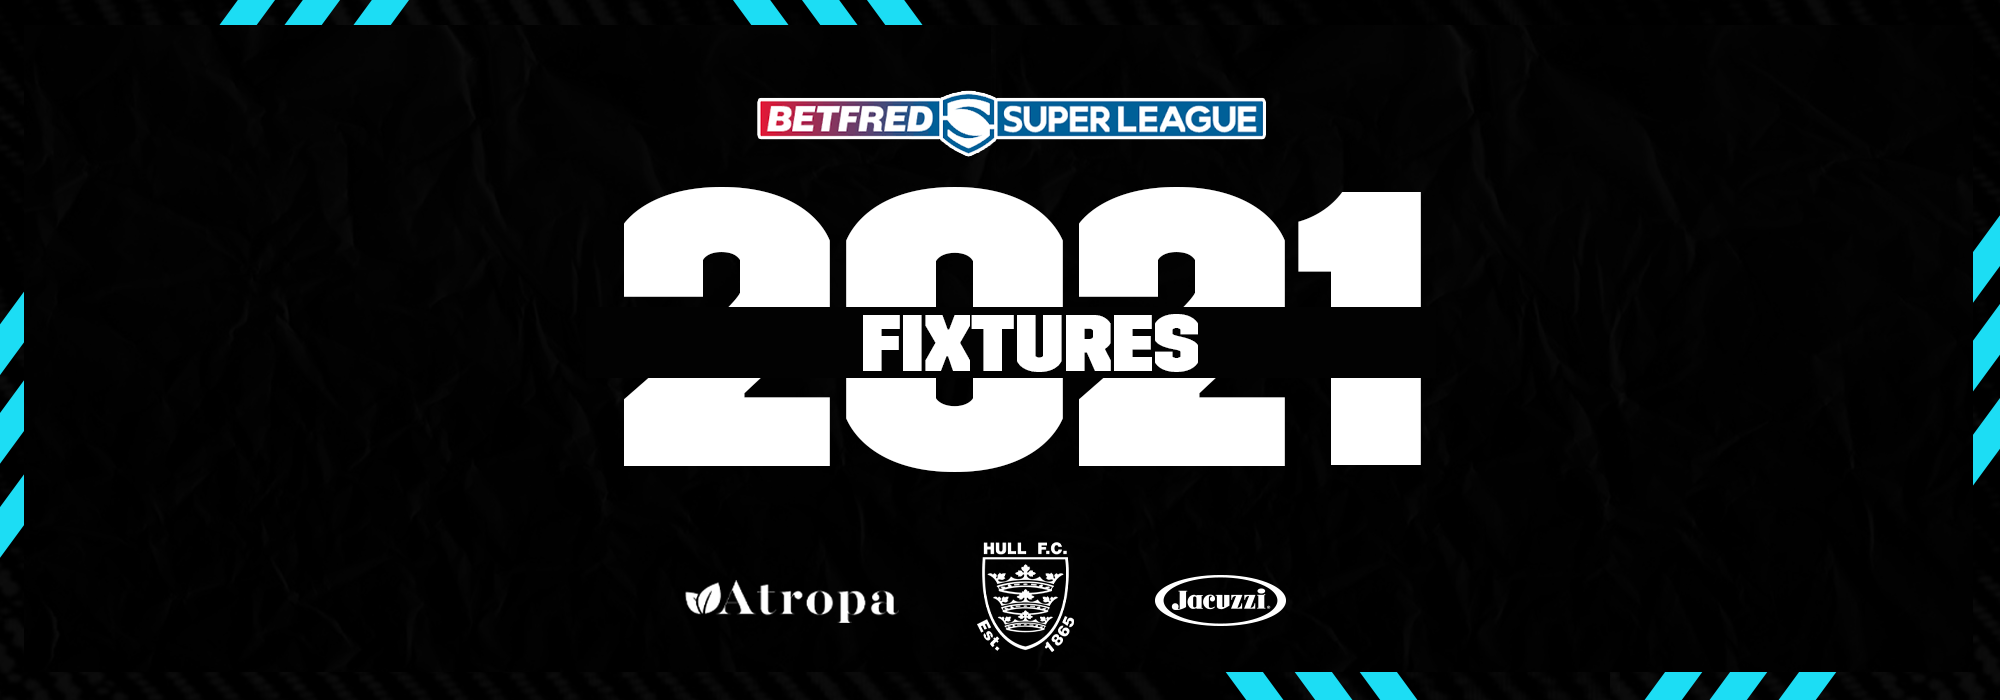 Hull FC’s 2021 Betfred Super League Fixtures Revealed